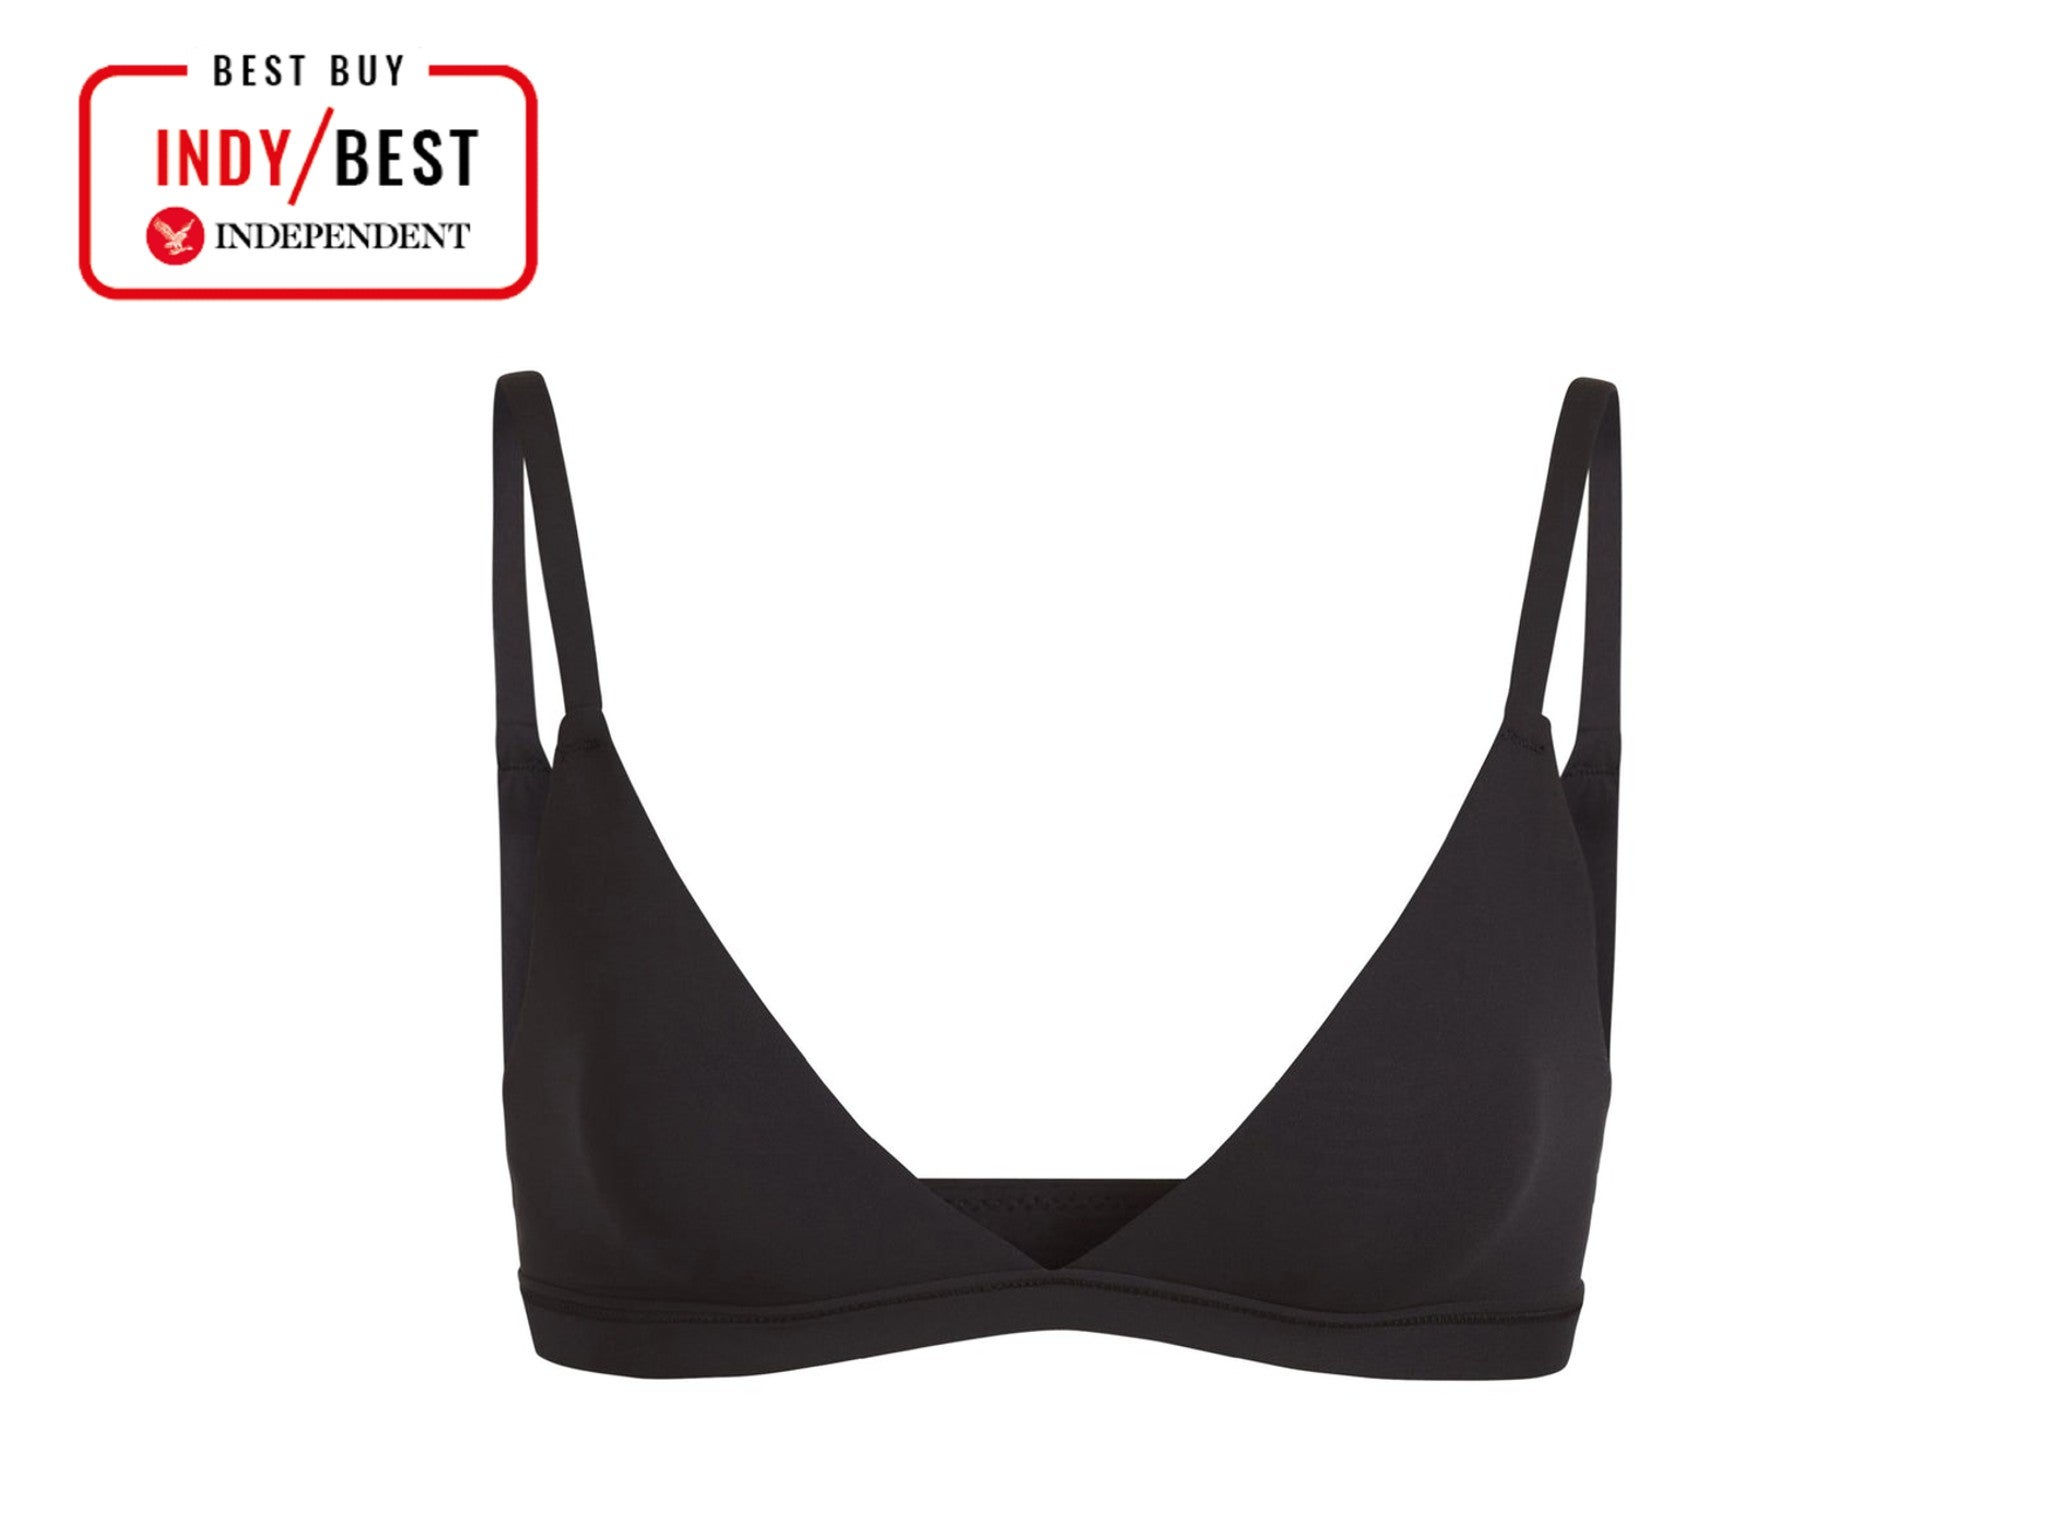 9 Best comfy bras for 2022: we tested out some staple styles for